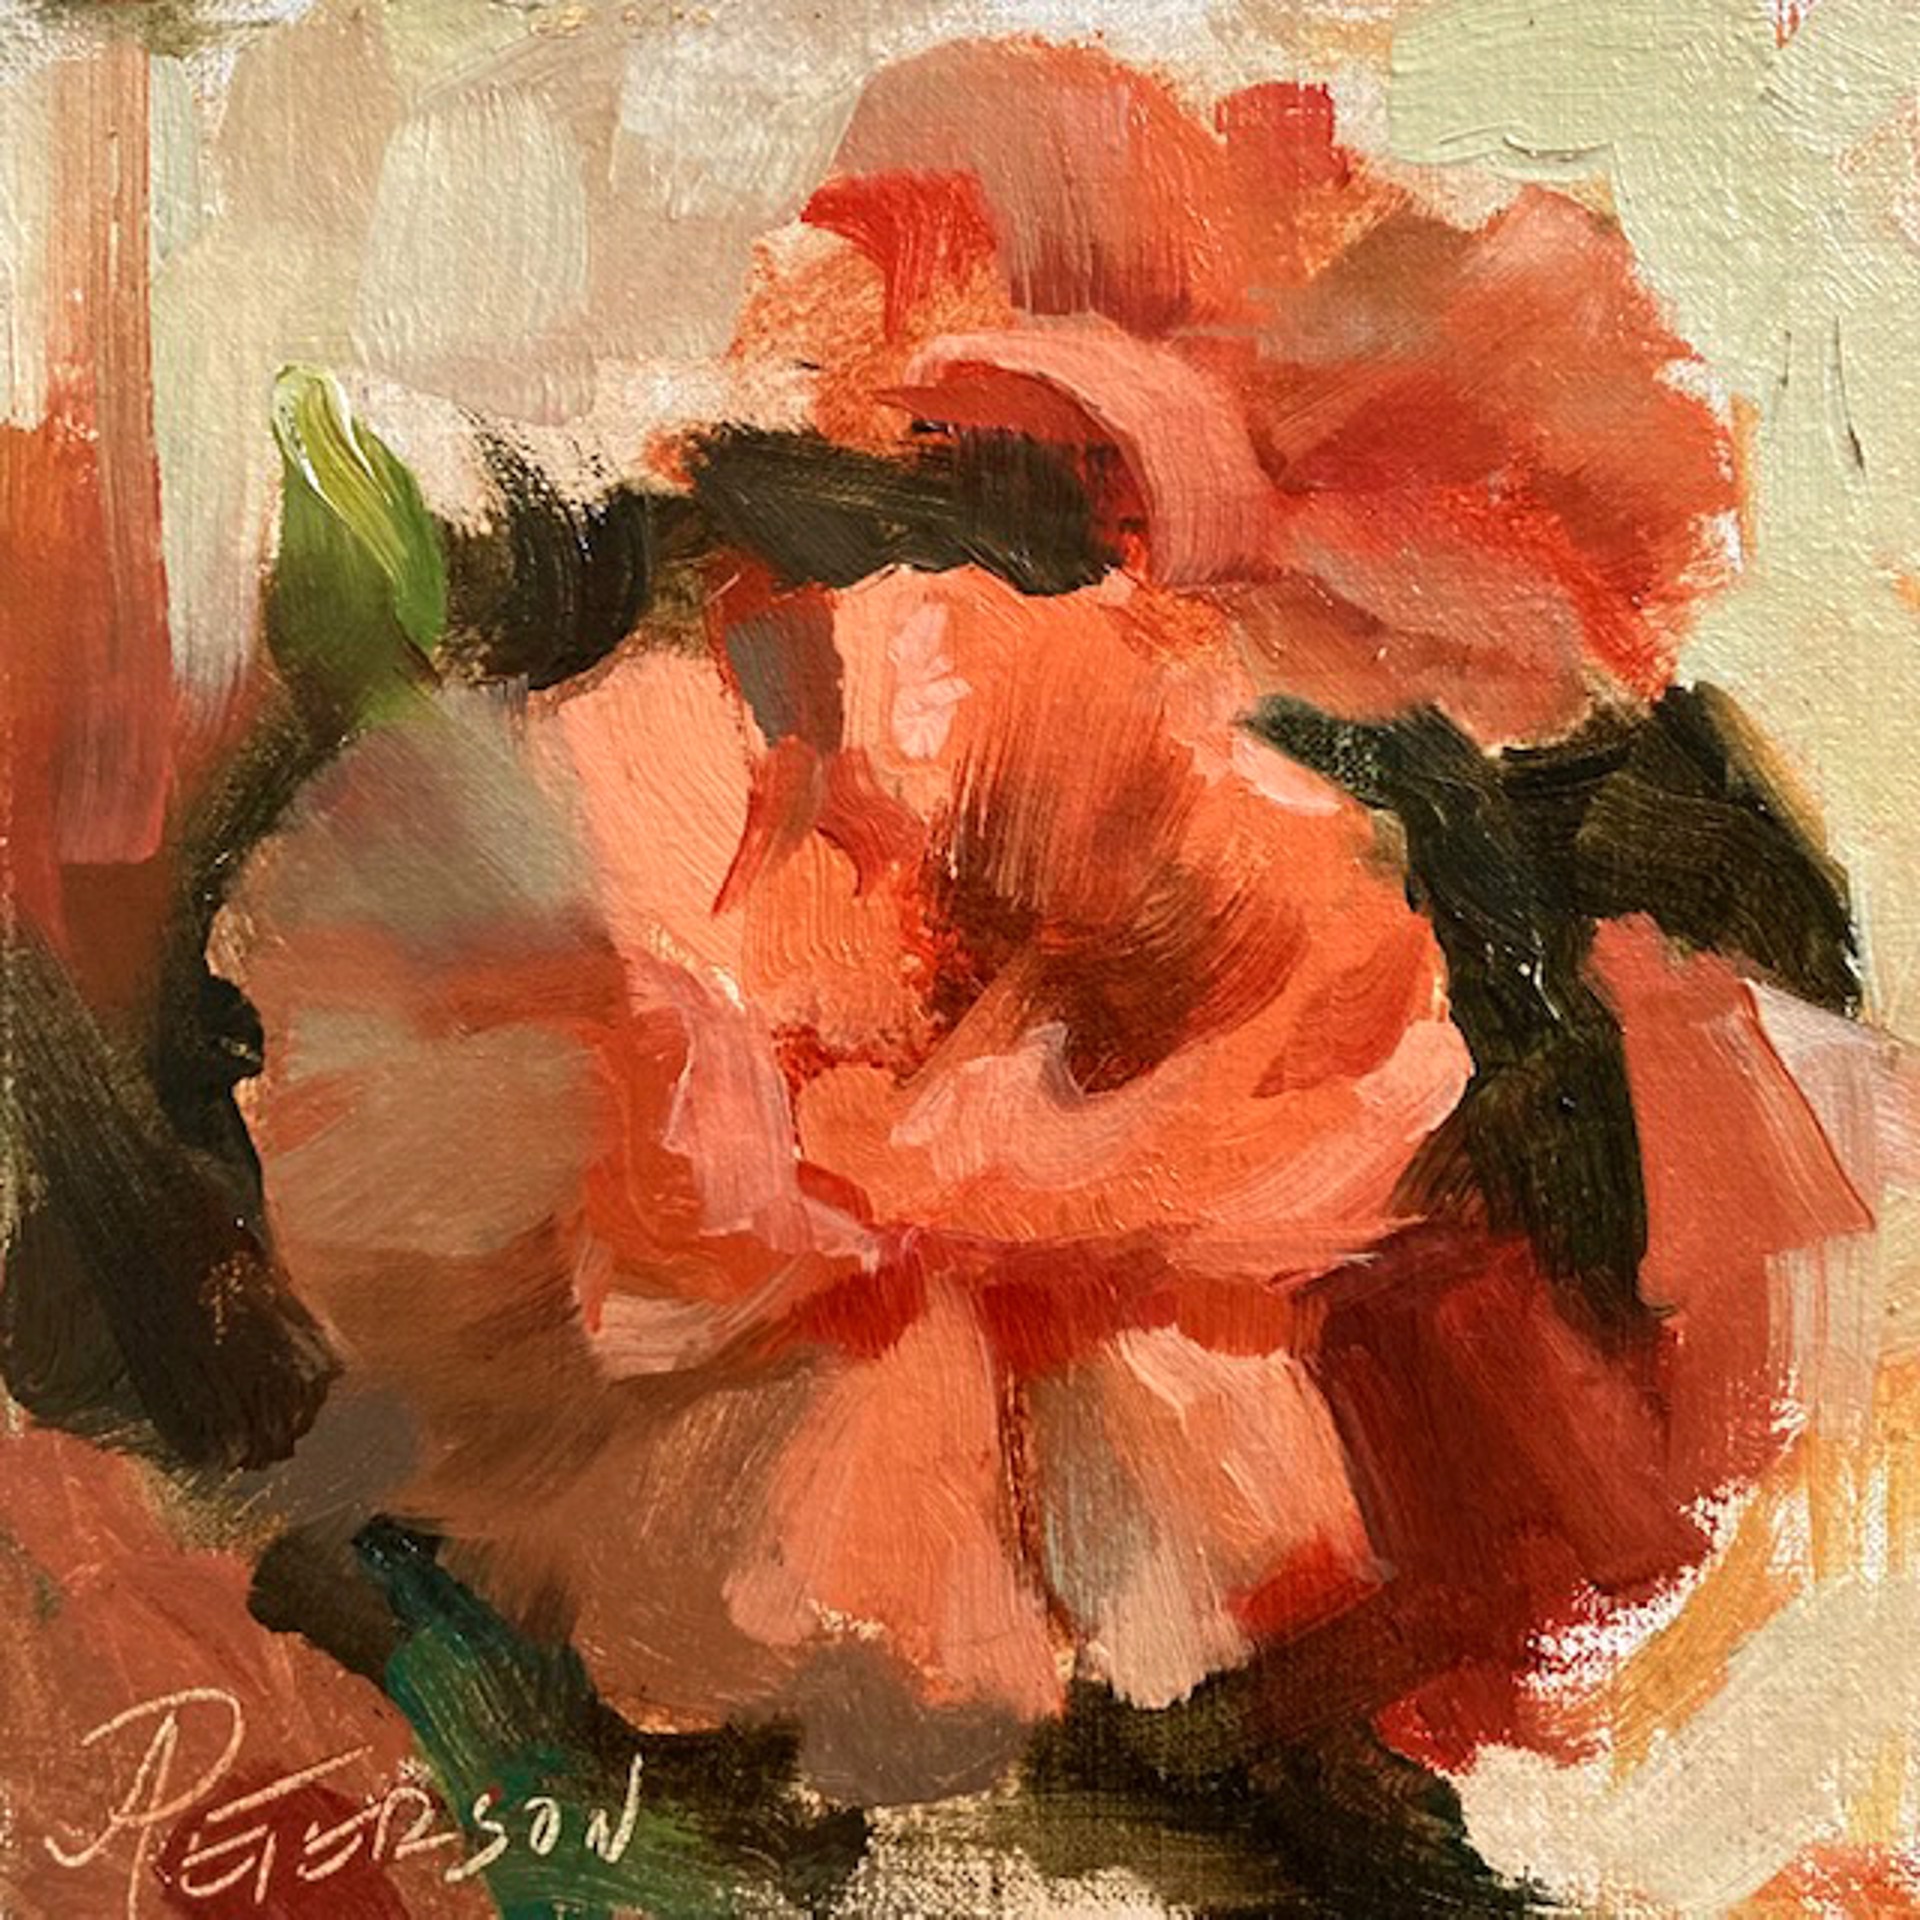 Stop and Paint the Roses by Amy R. Peterson